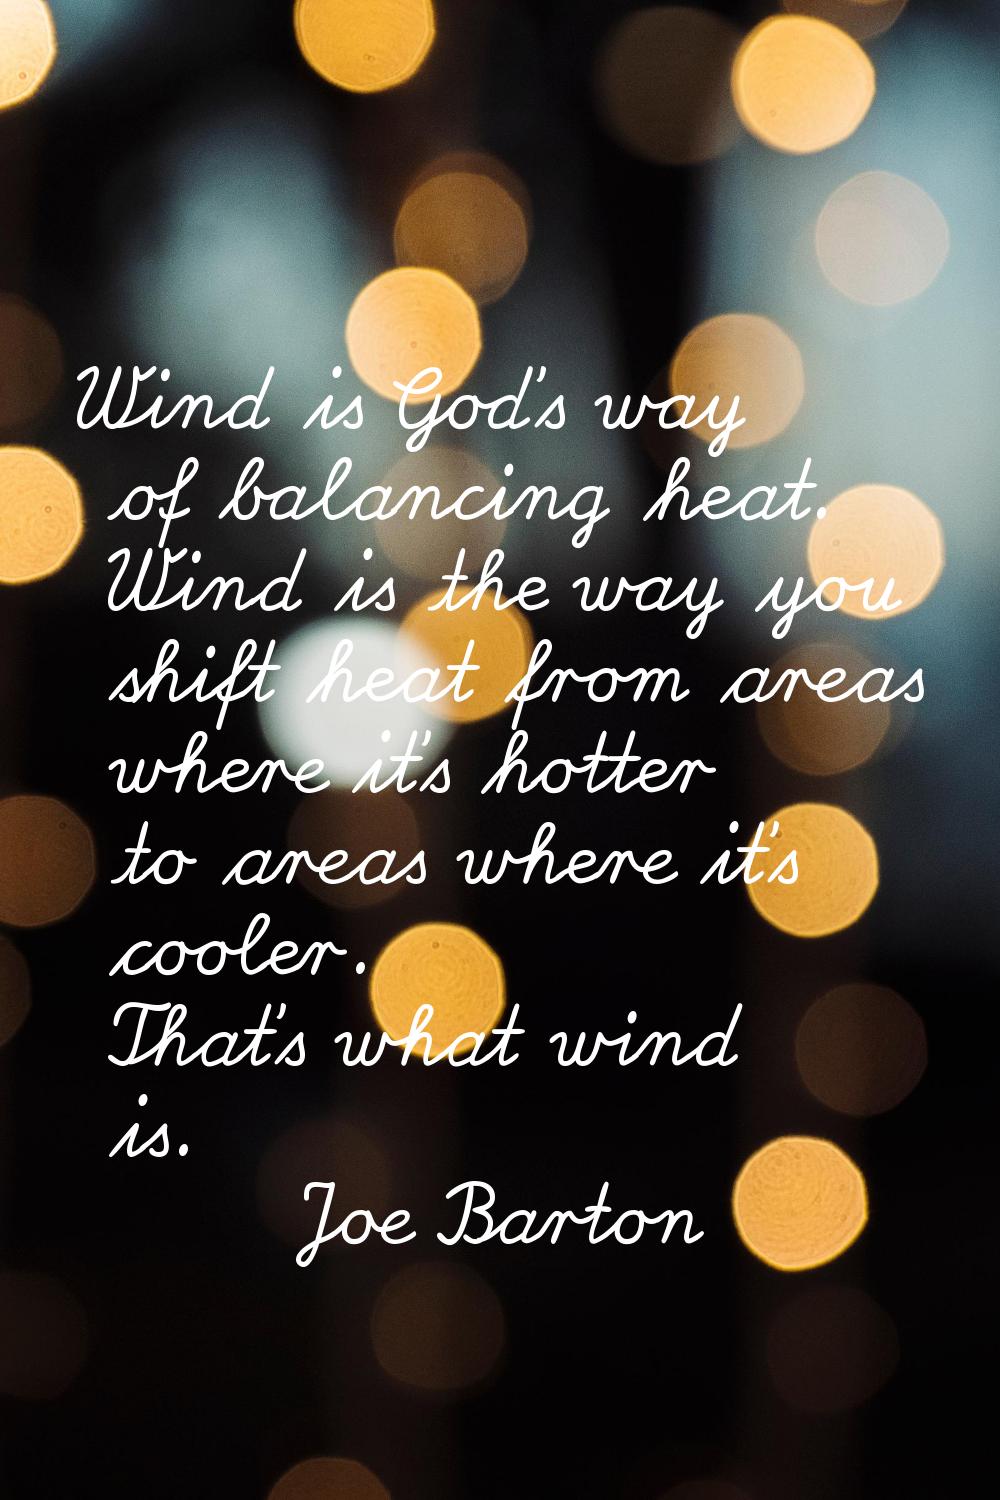 Wind is God's way of balancing heat. Wind is the way you shift heat from areas where it's hotter to